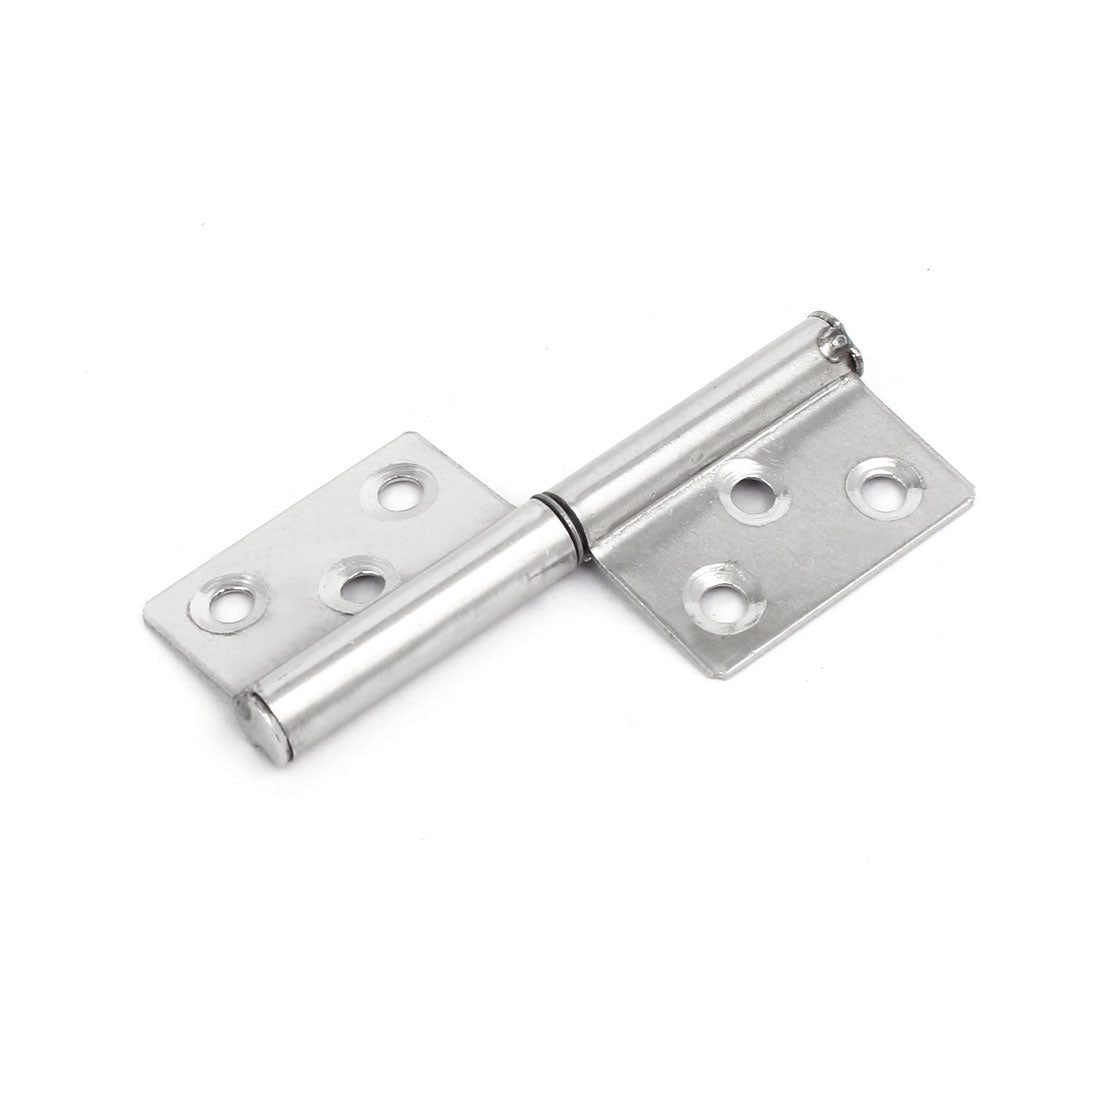 uxcell Uxcell 2.5-inch Length Stainless Steel Lift Off Detachable Flag Hinge Silver Tone